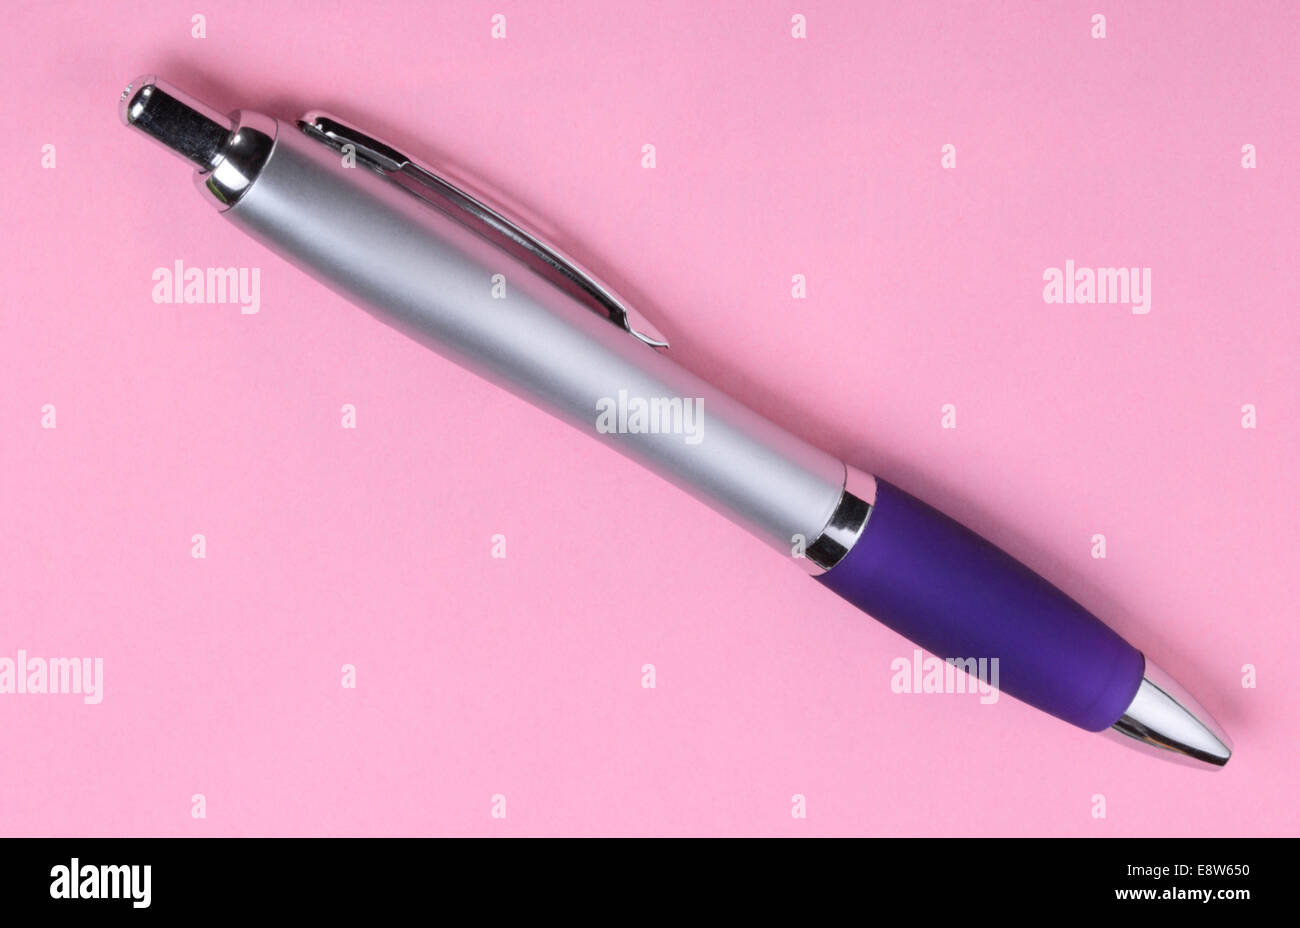 Ball Pen on Pink Background Stock Photo